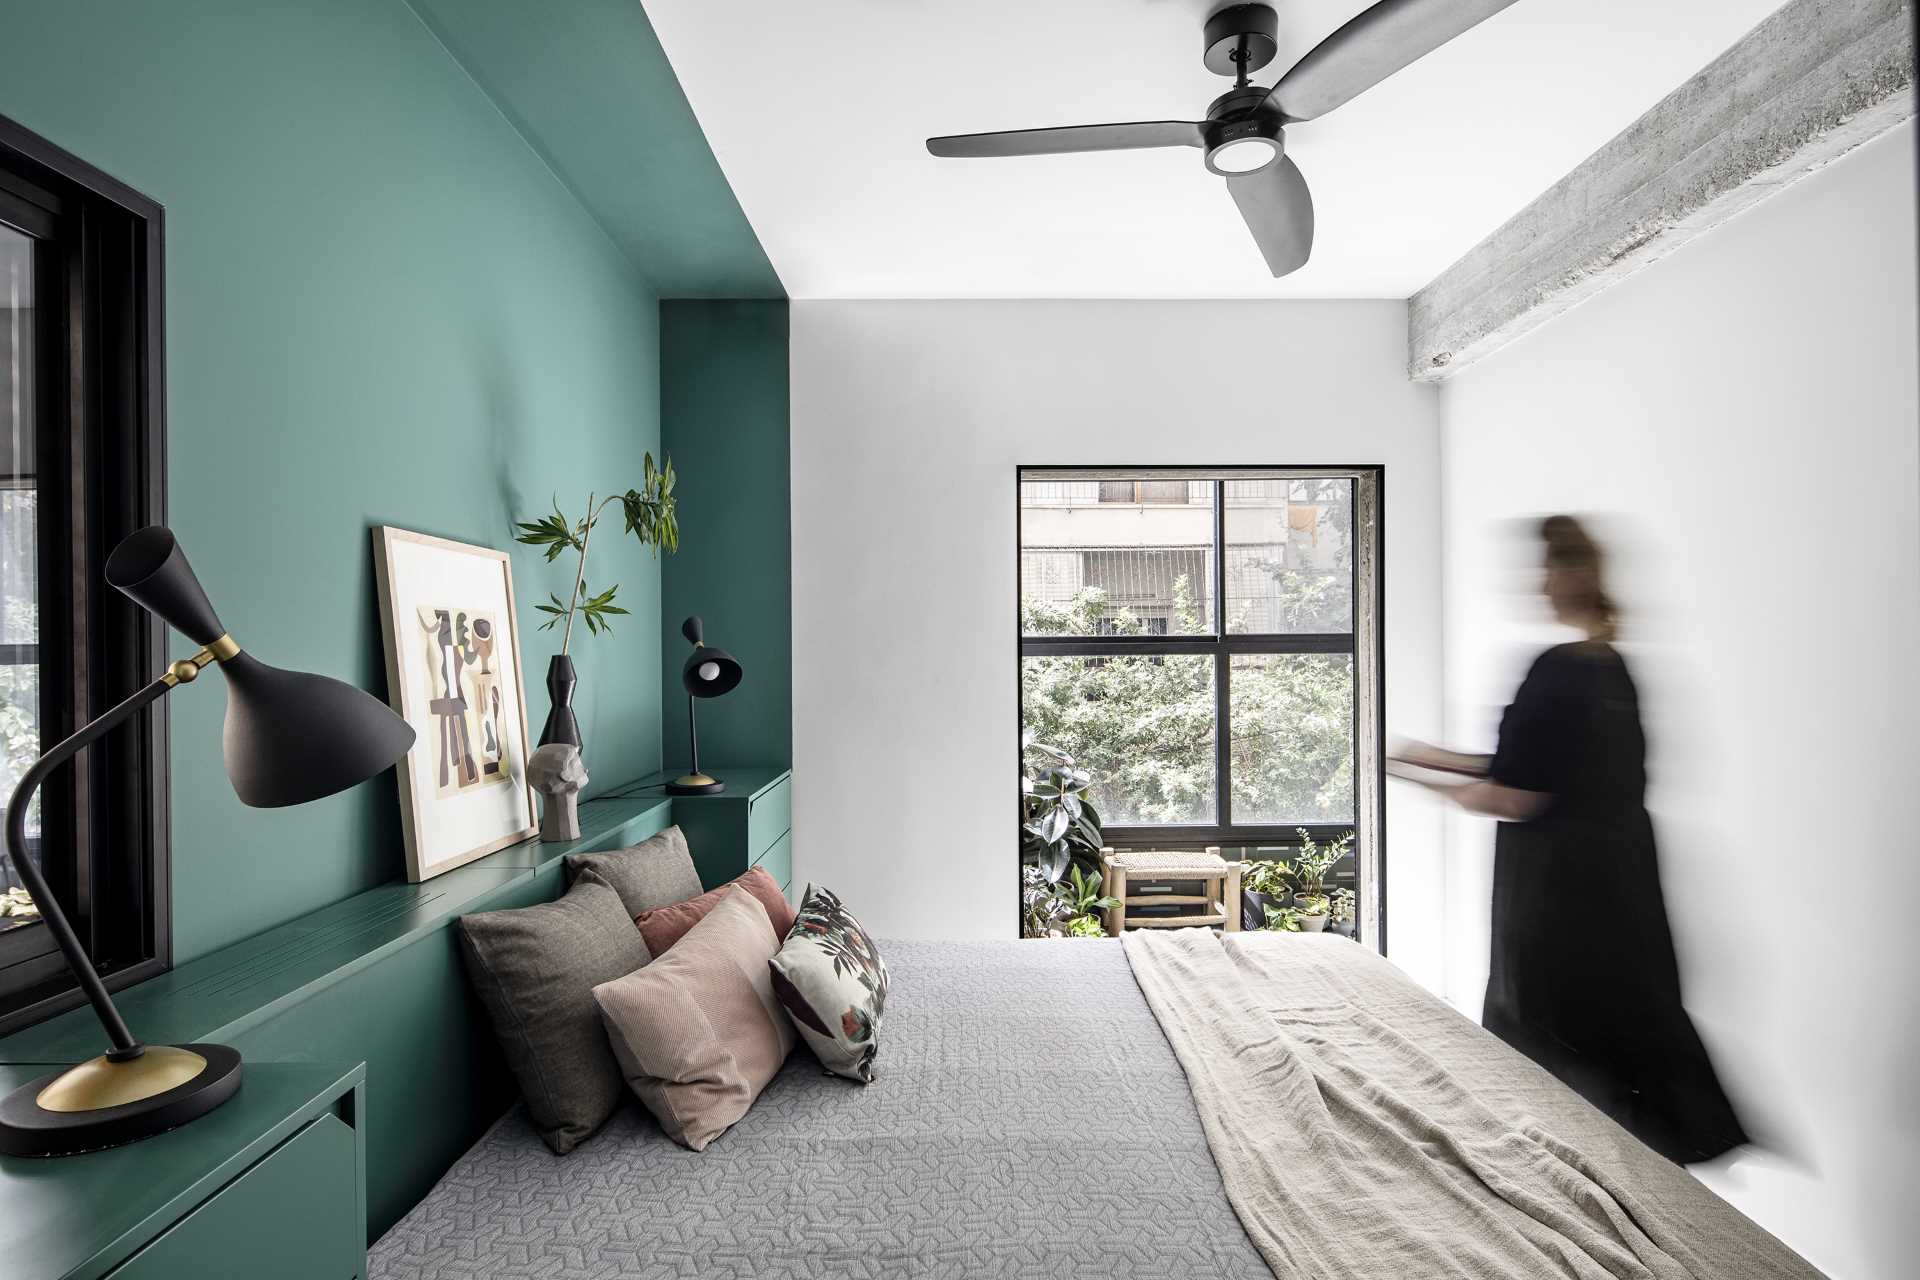 This modern bedroom has a green accent wall that frames the bed and wraps around the wall.